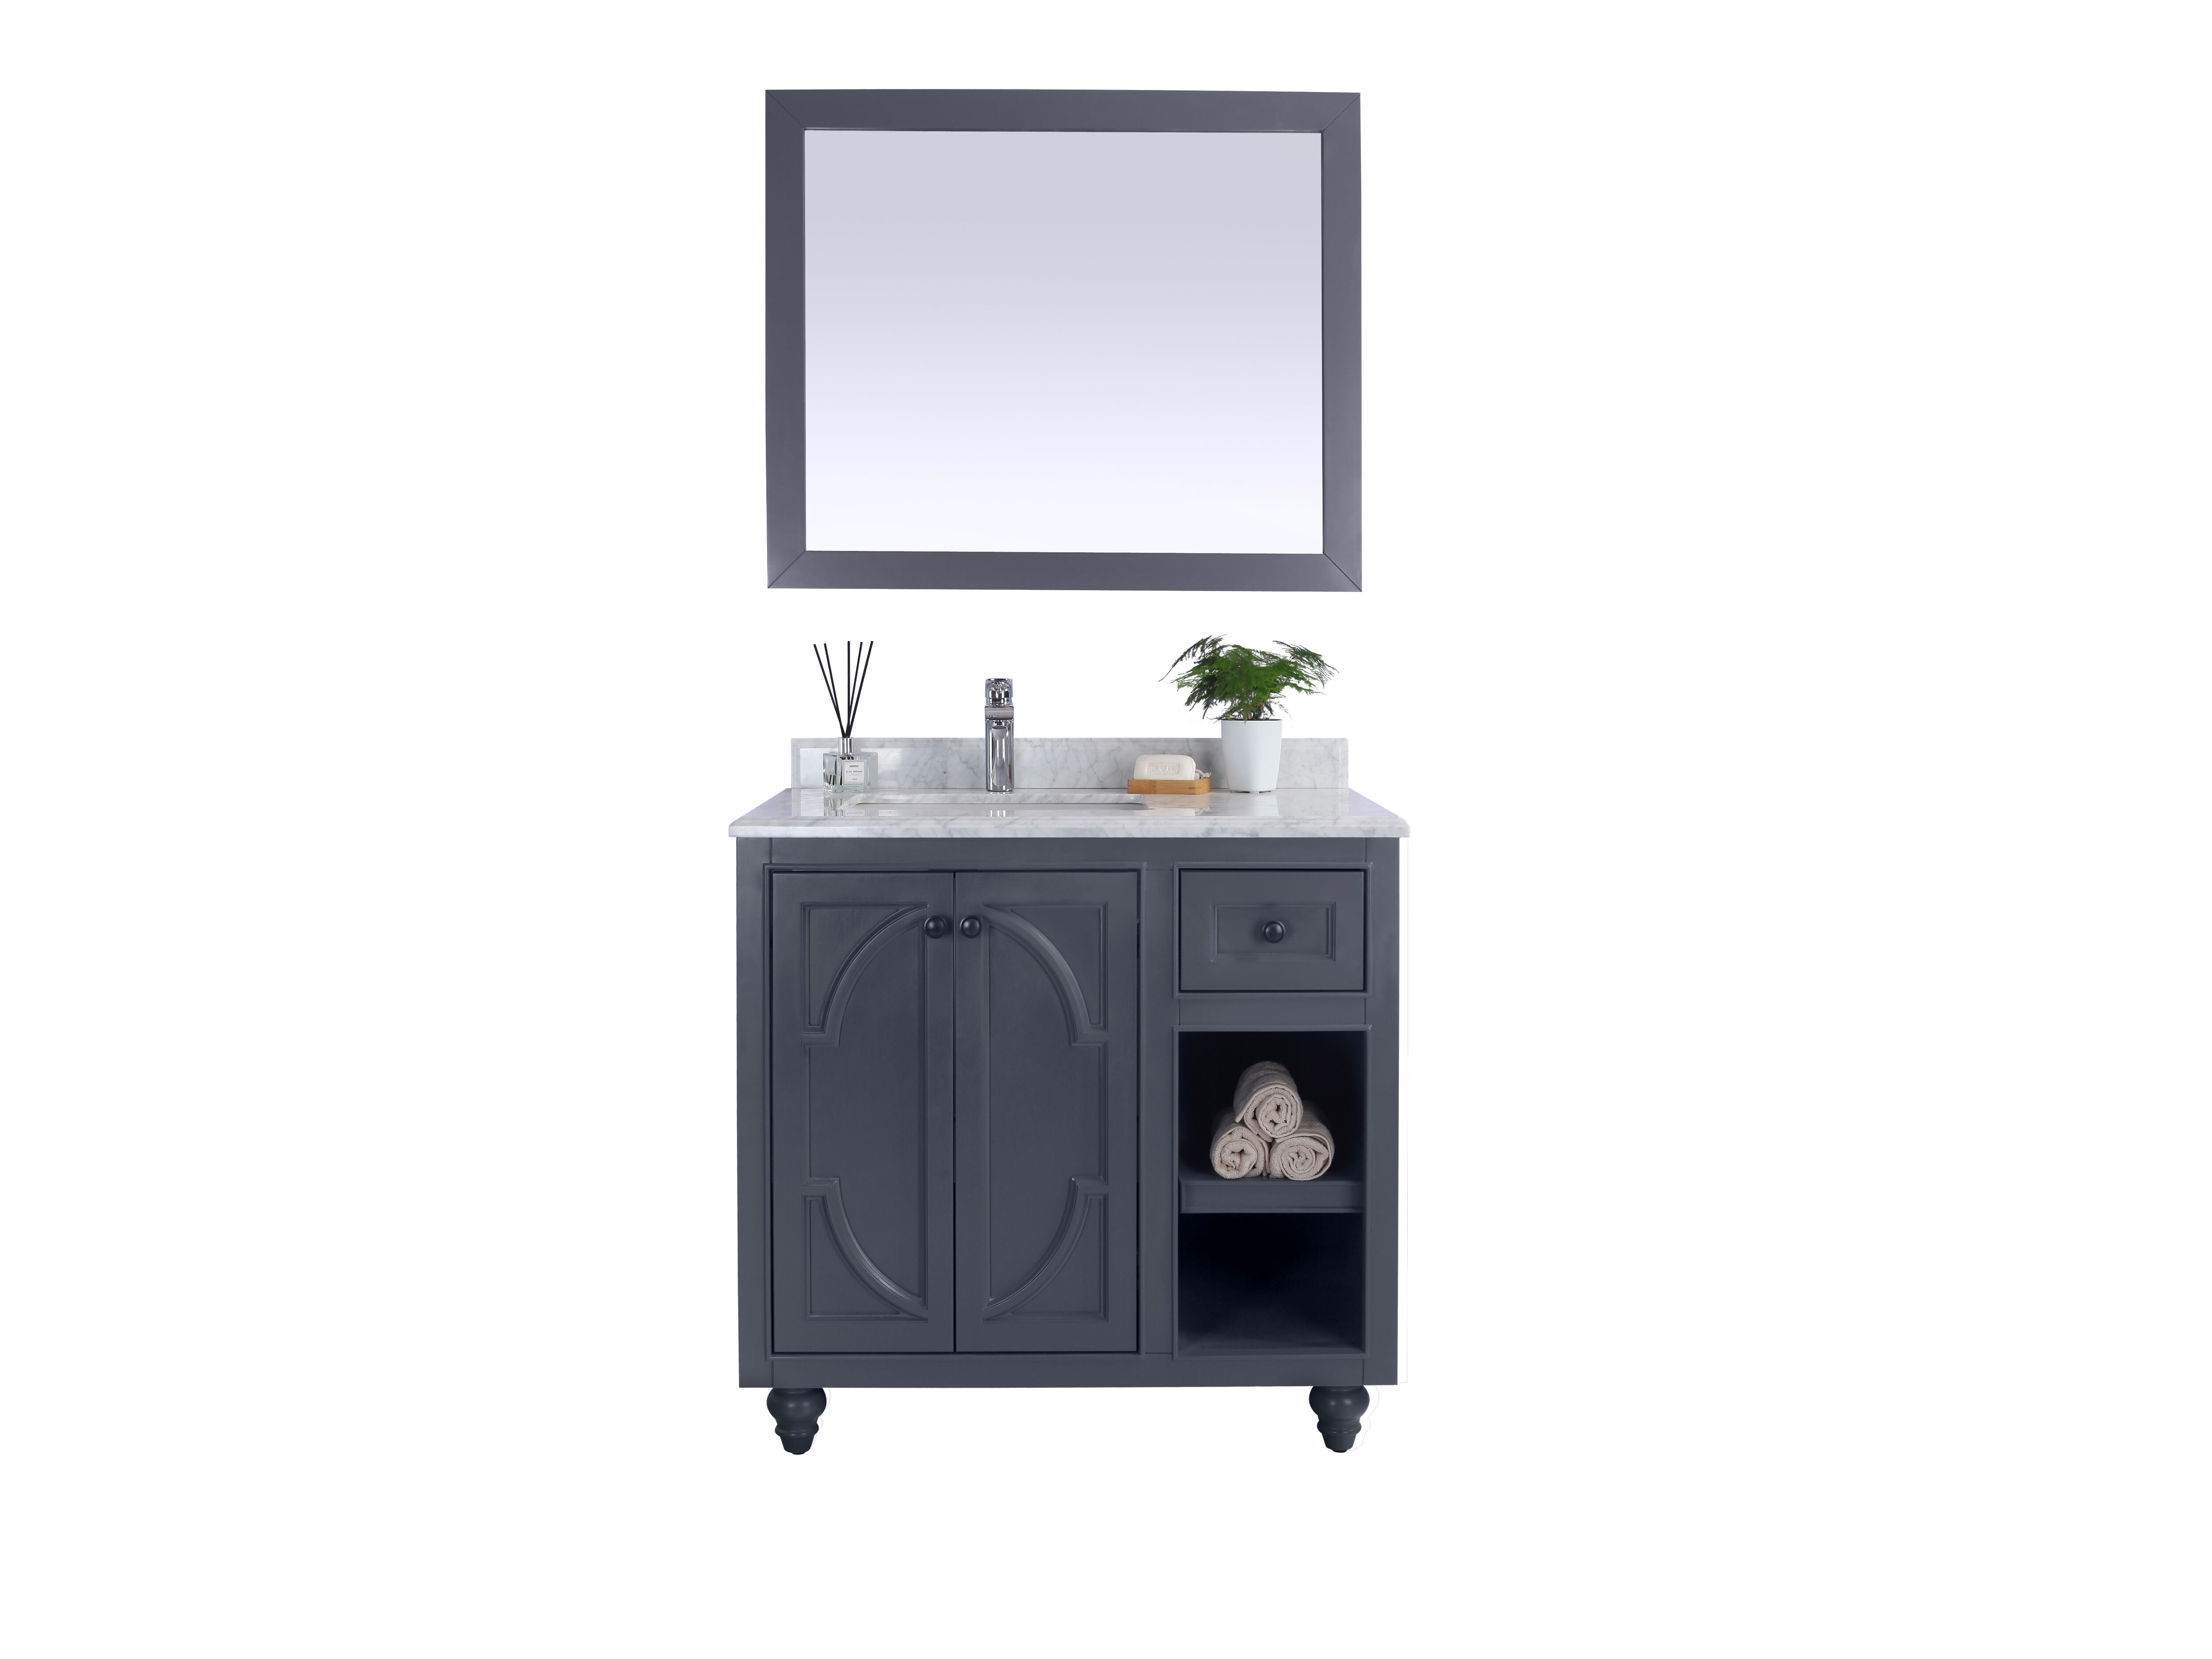 36" Single Bathroom Vanity Cabinet + Top and Color Options